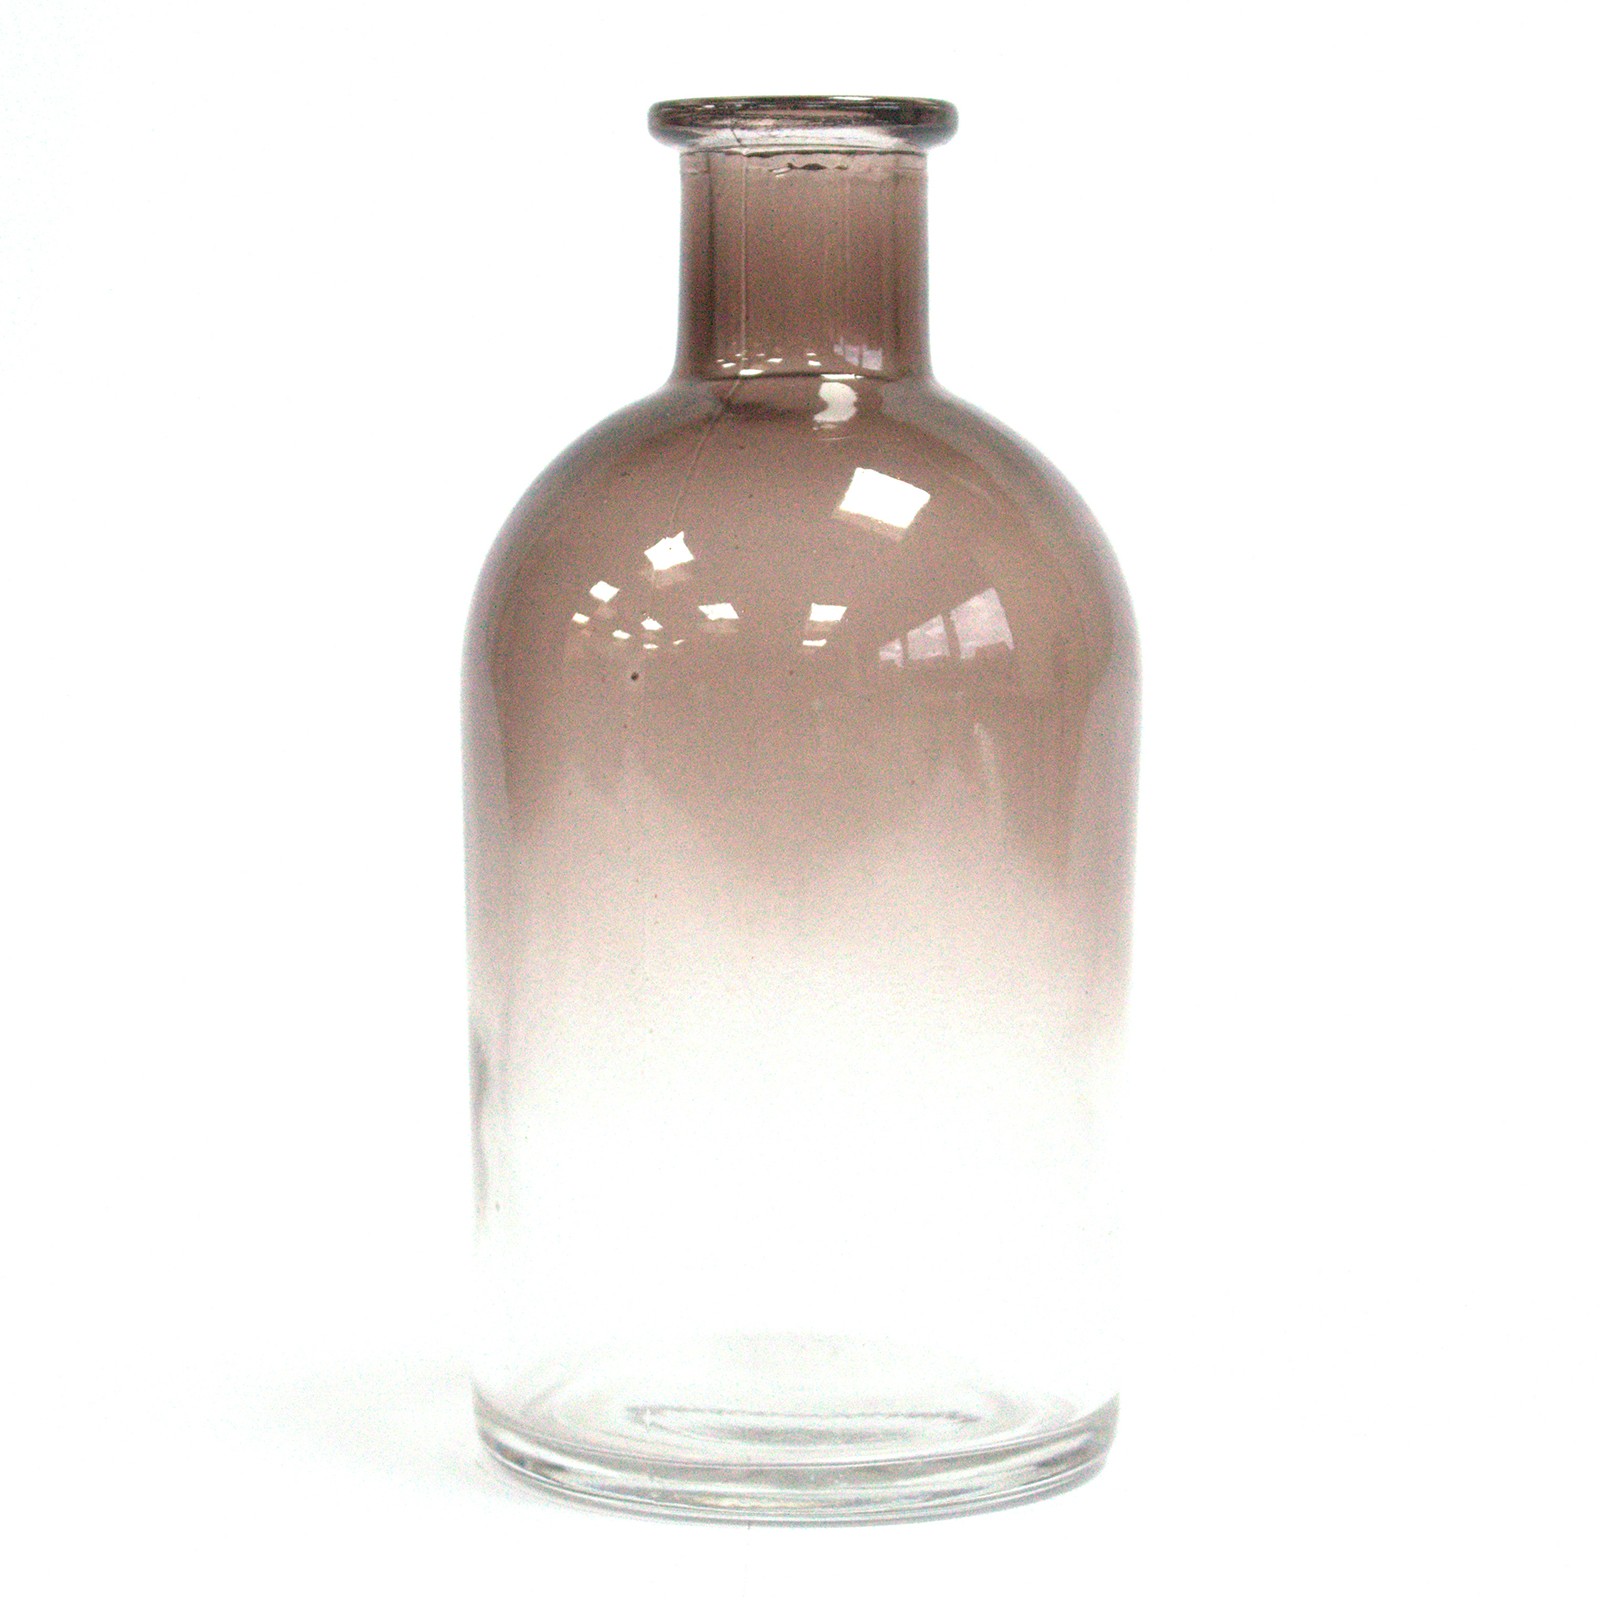 250 ml Round Antique Reed Diffuser Bottle - Charcoal